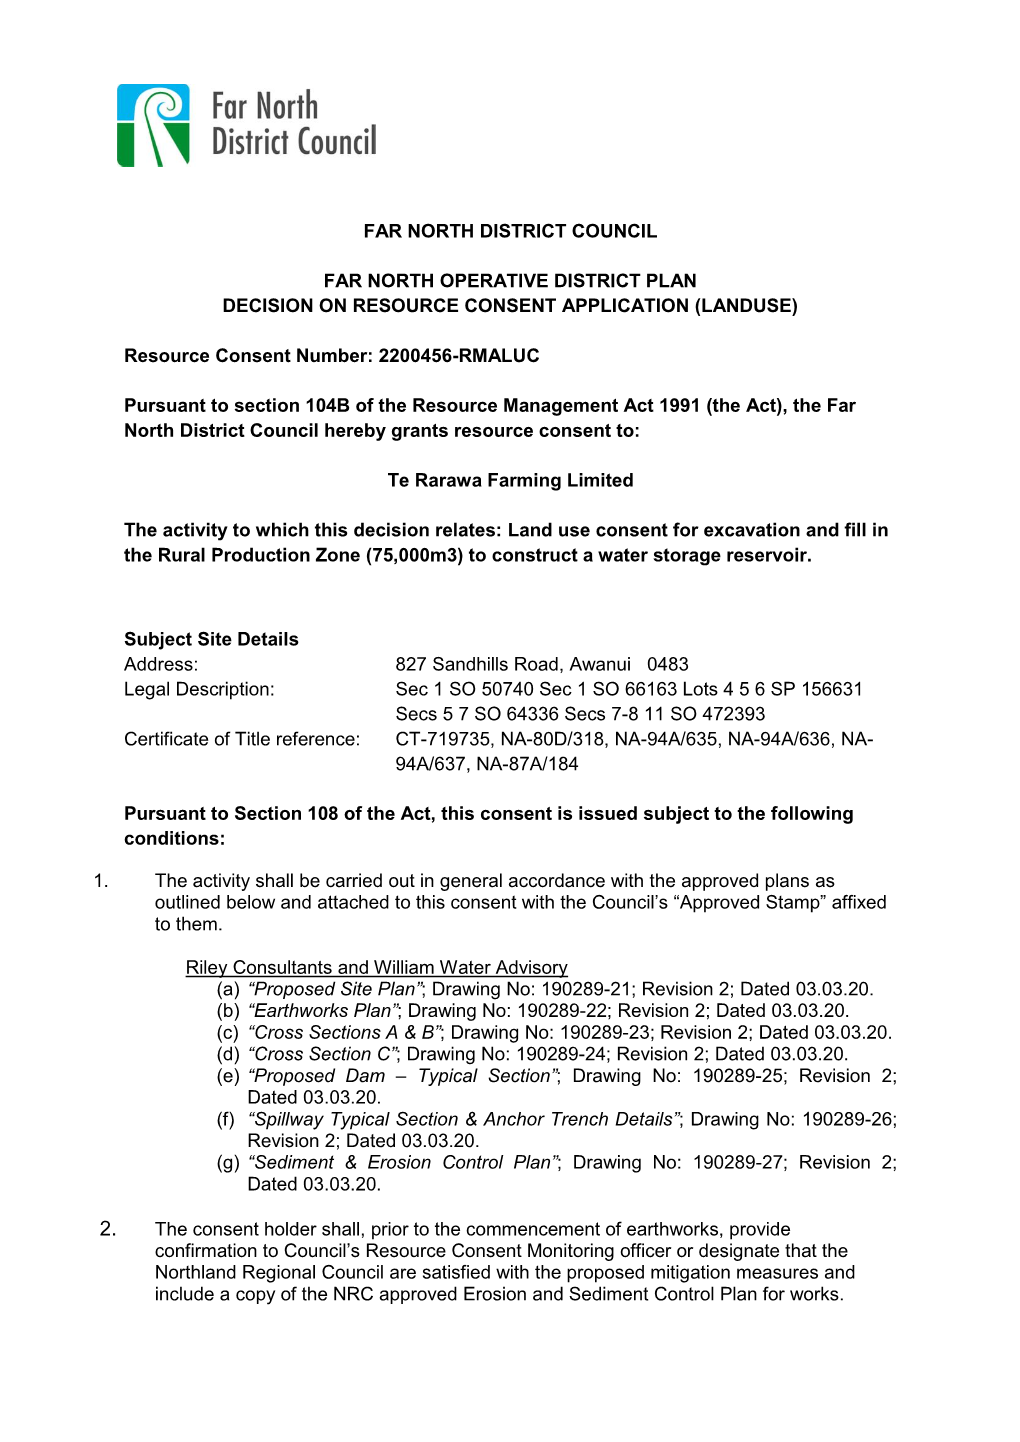 FAR NORTH DISTRICT COUNCIL FAR NORTH OPERATIVE DISTRICT PLAN DECISION on RESOURCE CONSENT APPLICATION (LANDUSE) Resource Consent